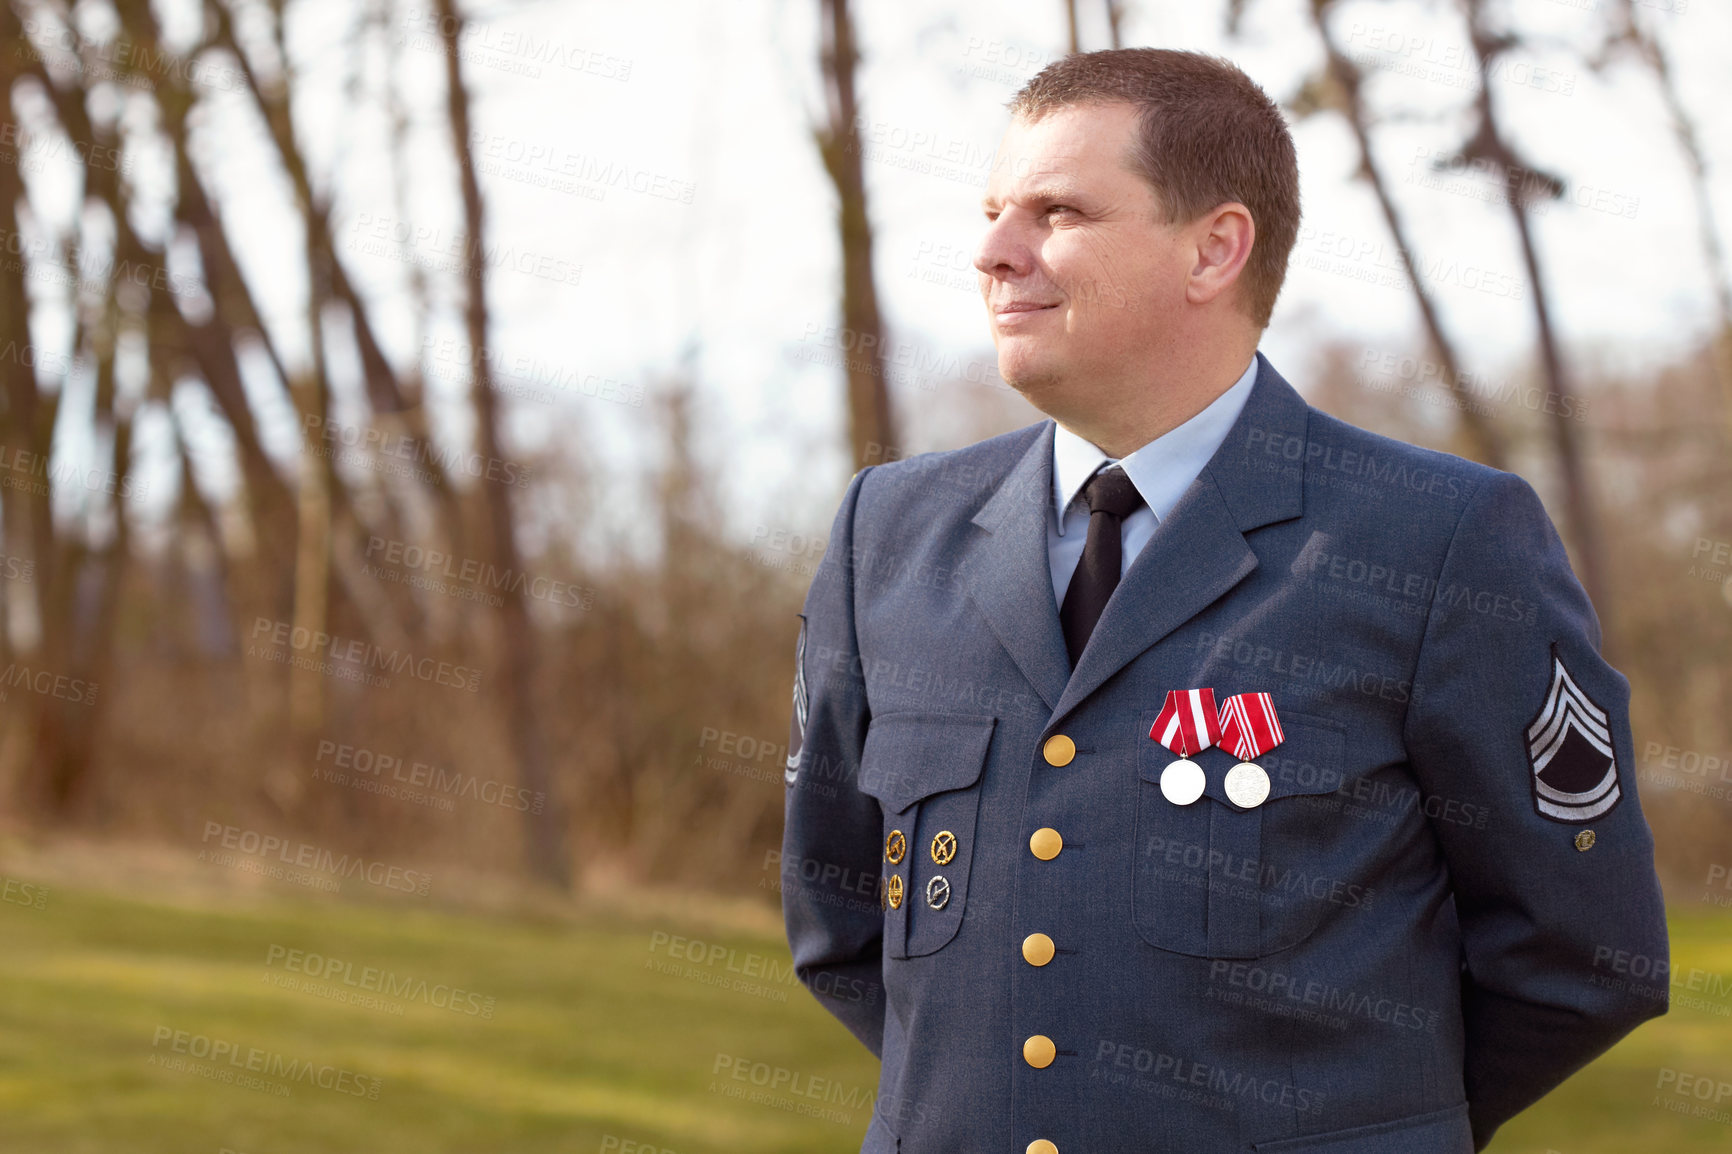 Buy stock photo Shot of a high ranking military officer standing at ease in the outdoors